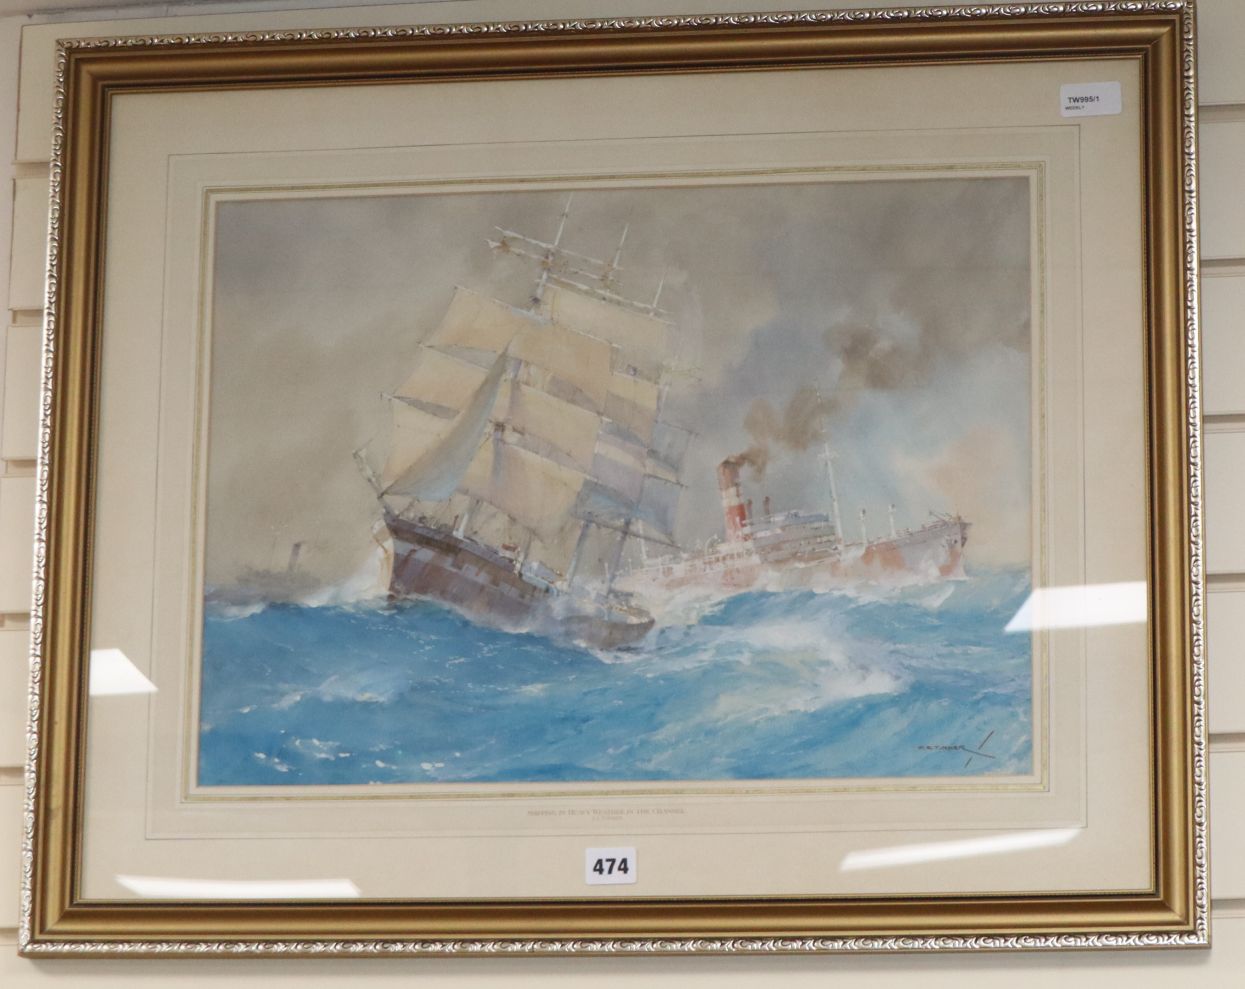 Charles E Turner (1883-1965), 'Shipping in Heavy Weather in the Channel', signed, watercolour